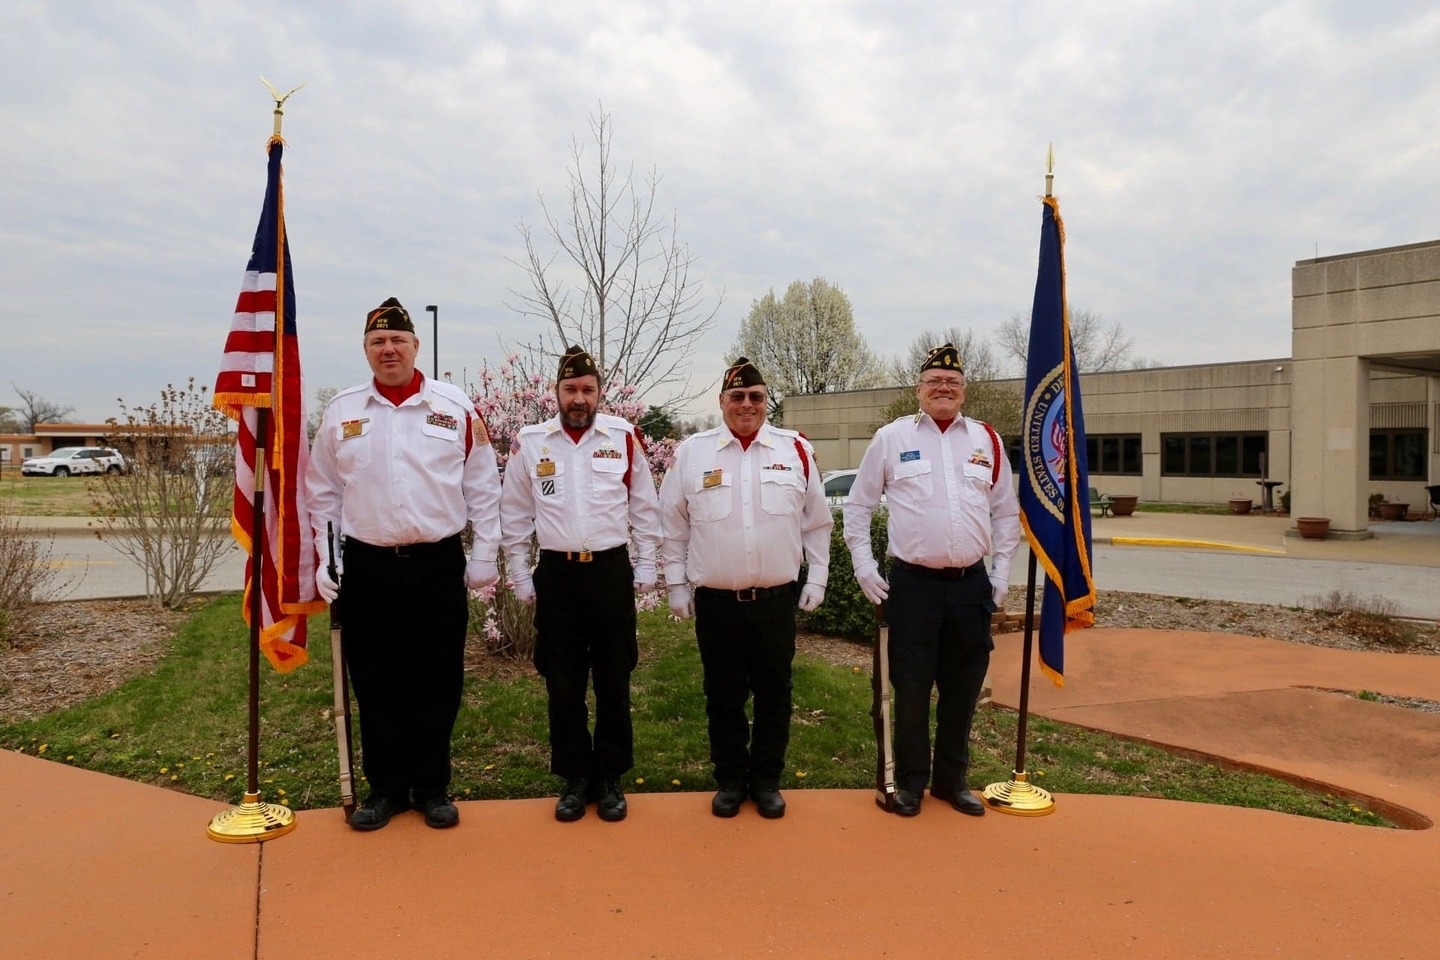 Members of the Benton American Legion Post 280/VFW Post 2671 Honor Guard were invited to participate in the Last Call Ceremony held at the Marion VA Hospital's Community Living Center. Our Honor Guard had the honor of posting the Colors for this hallowed event which honors the Veteran's who had passed during the last few months. 